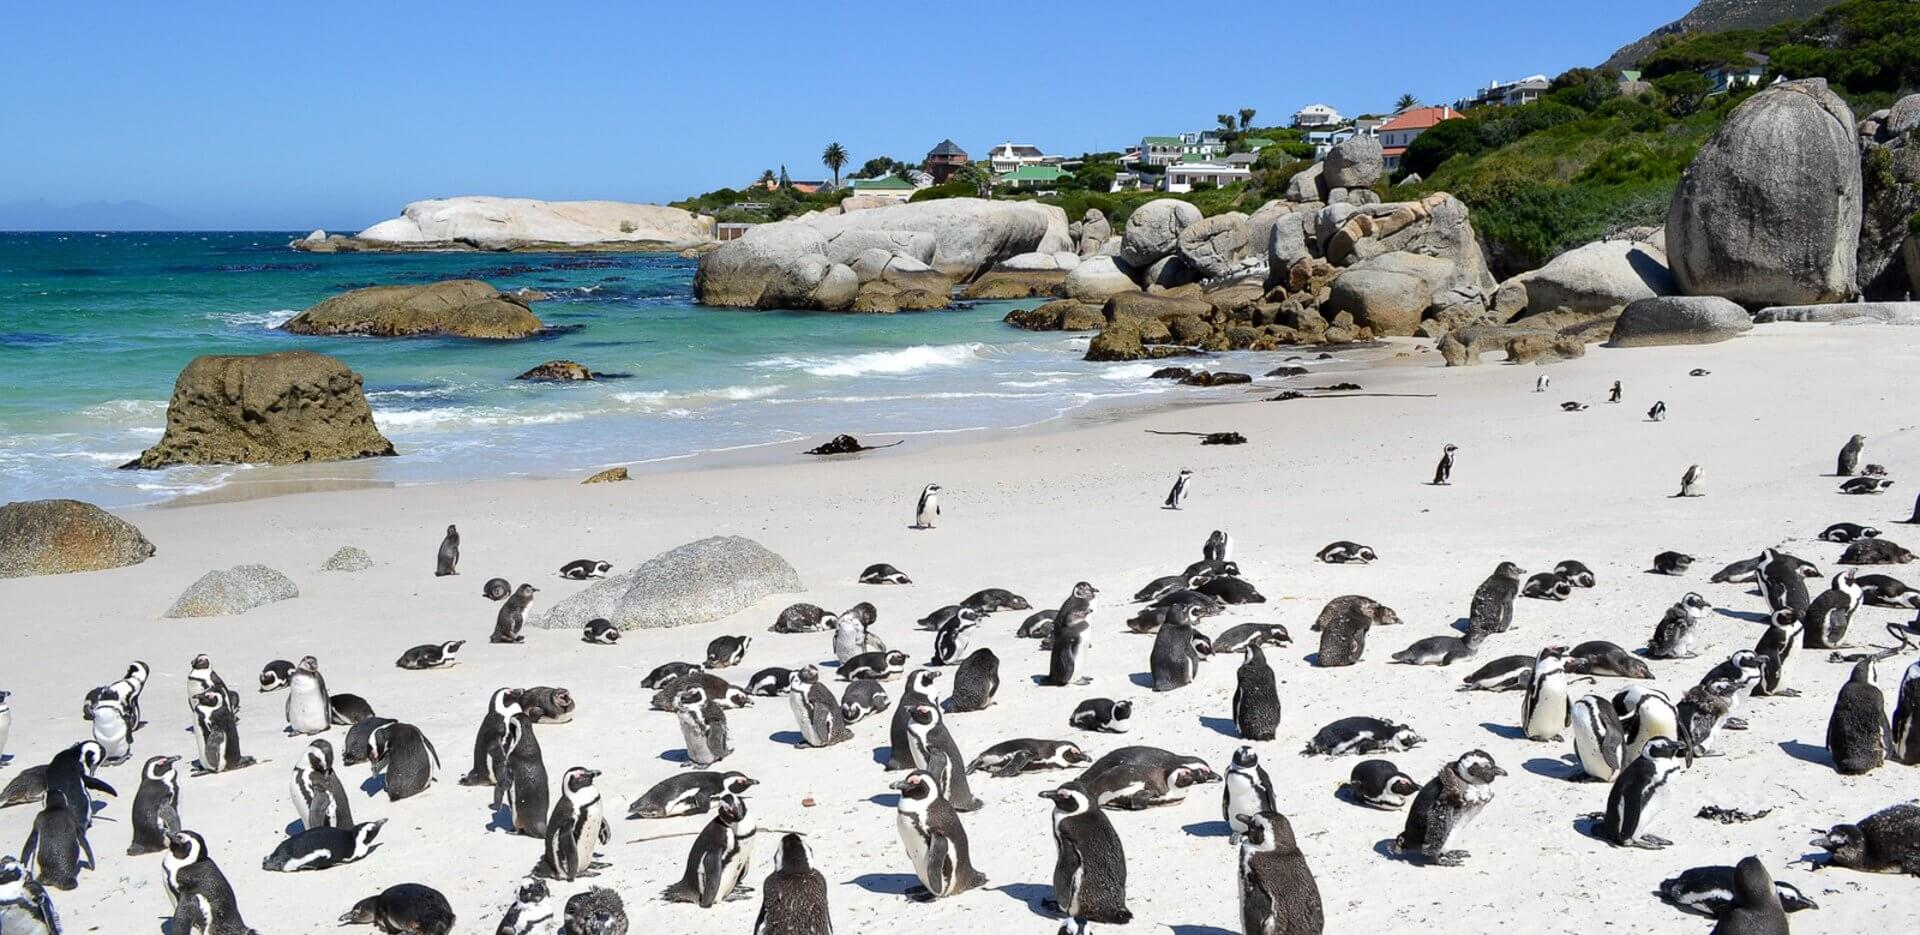 Penguins at Boulders Beach in Simonstown Cape Town